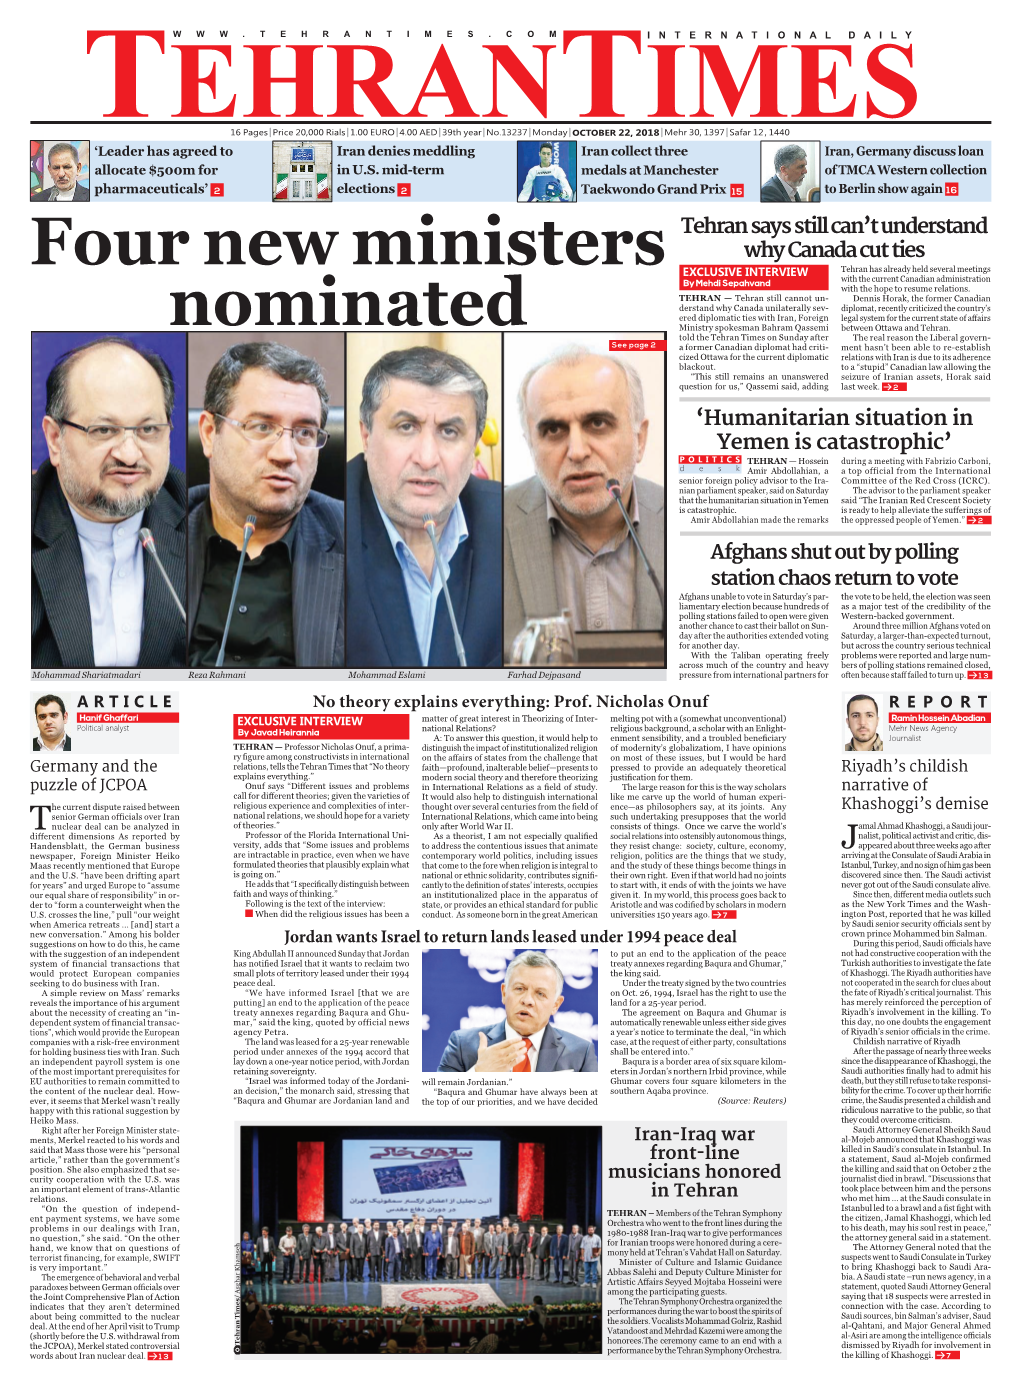 Four New Ministers Nominated